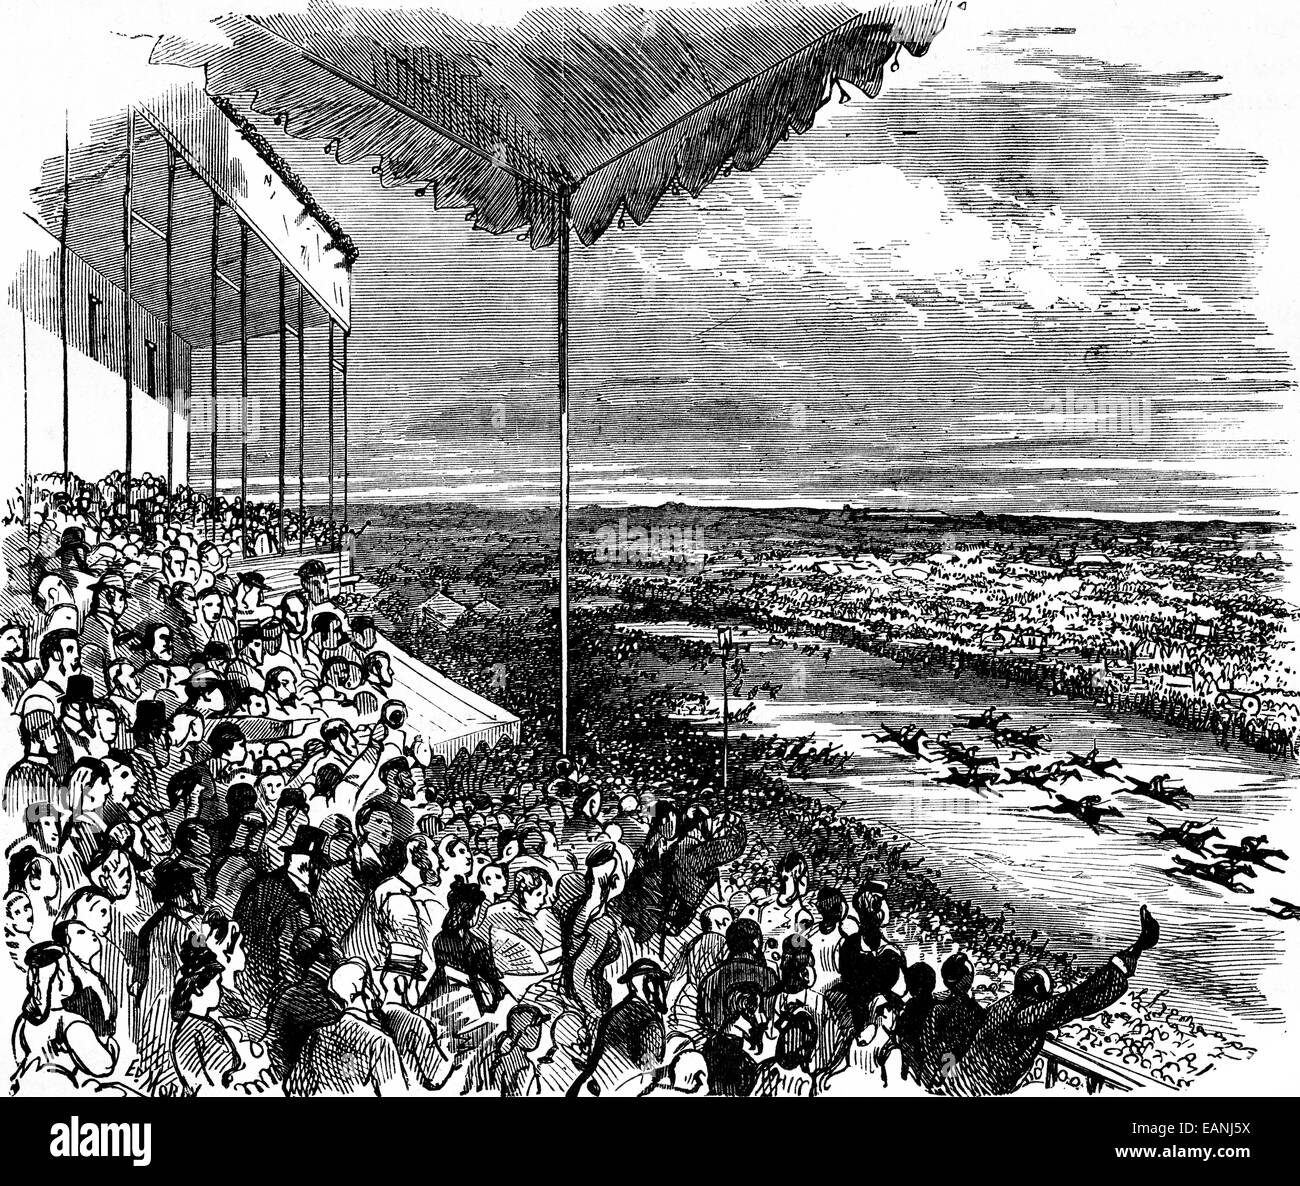 The large stand during a race, vintage engraved illustration. Journal des Voyage, Travel Journal, (1879-80). Stock Photo